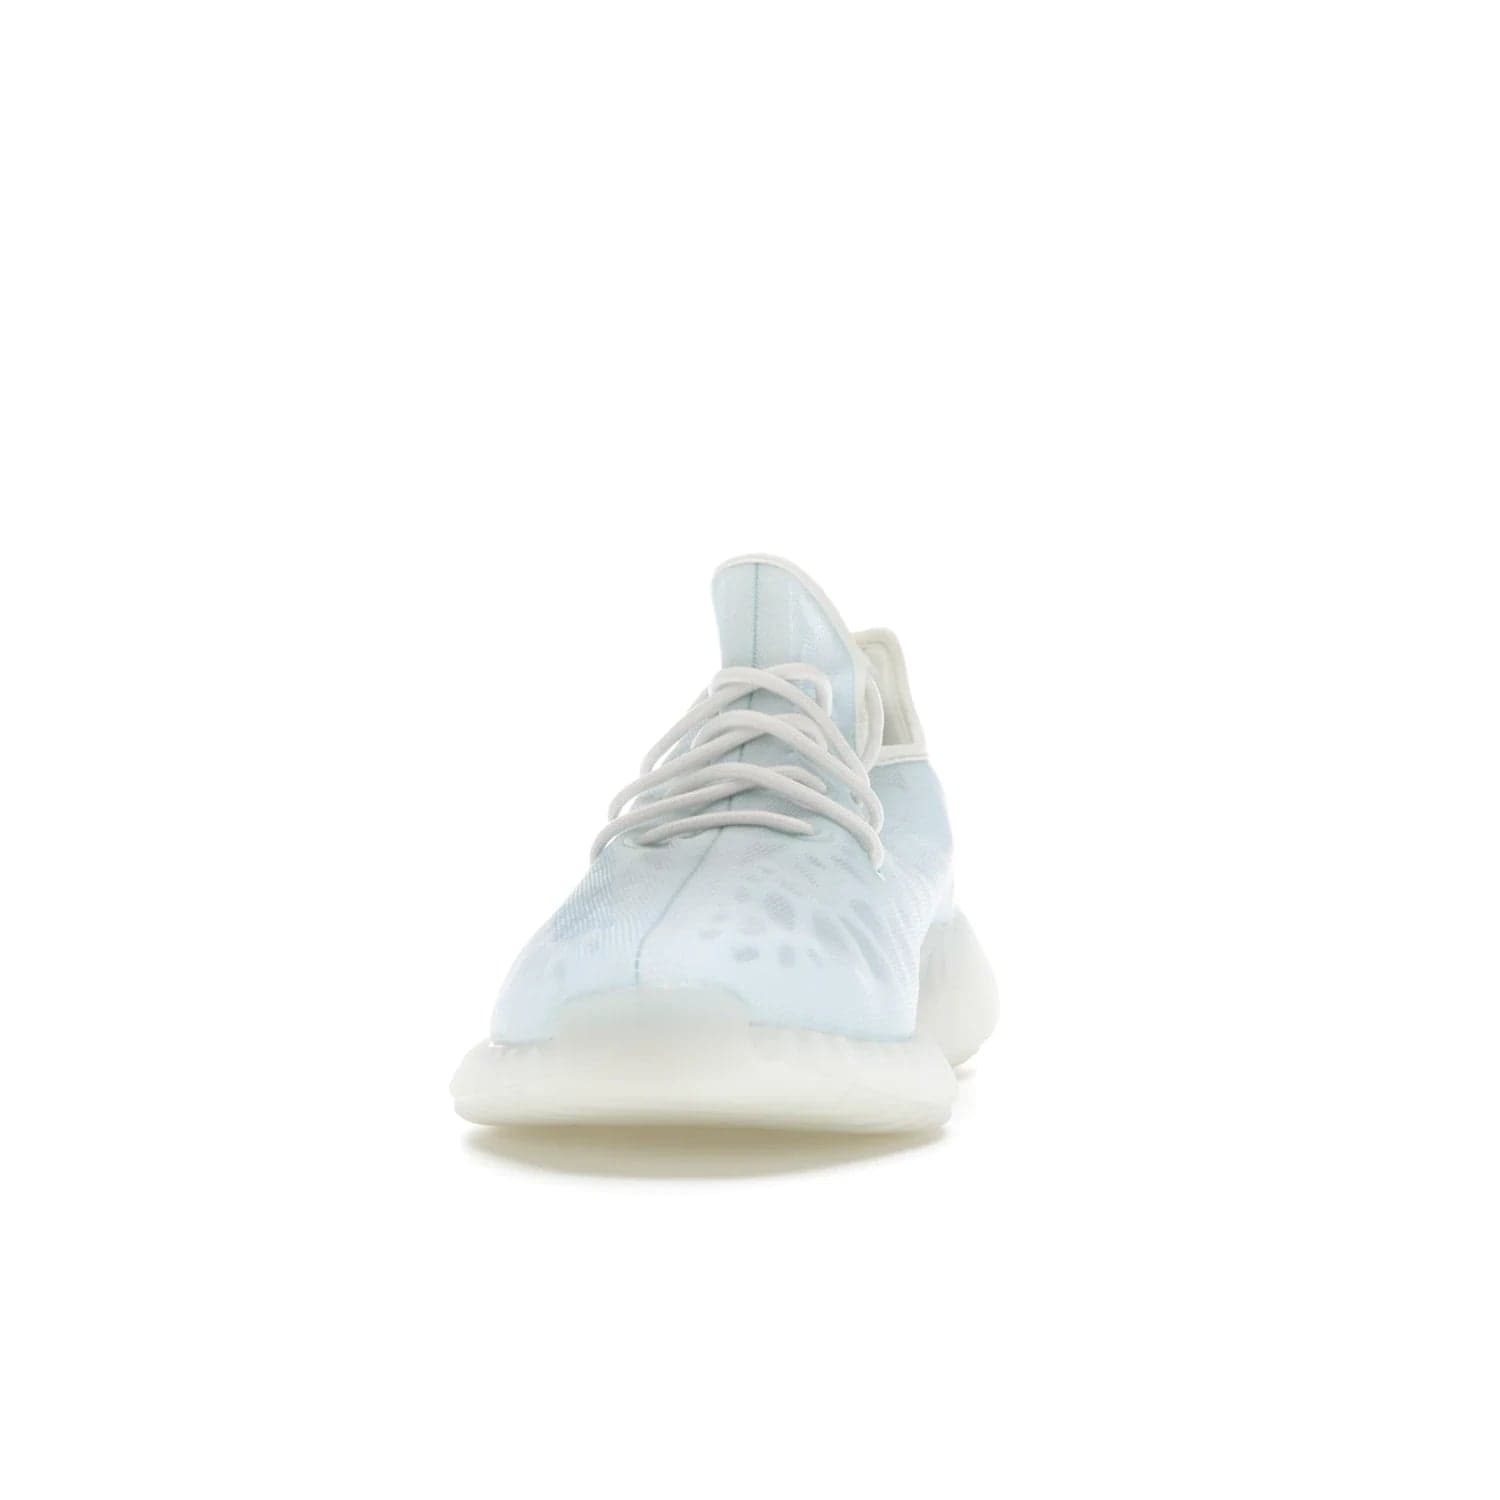 adidas Yeezy Boost 350 V2 Mono Ice - Image 11 - Only at www.BallersClubKickz.com - Introducing the adidas Yeezy 350 V2 Mono Ice - a sleek monofilament mesh design in Ice blue with Boost sole and heel pull tab. Released exclusively in the US for $220.